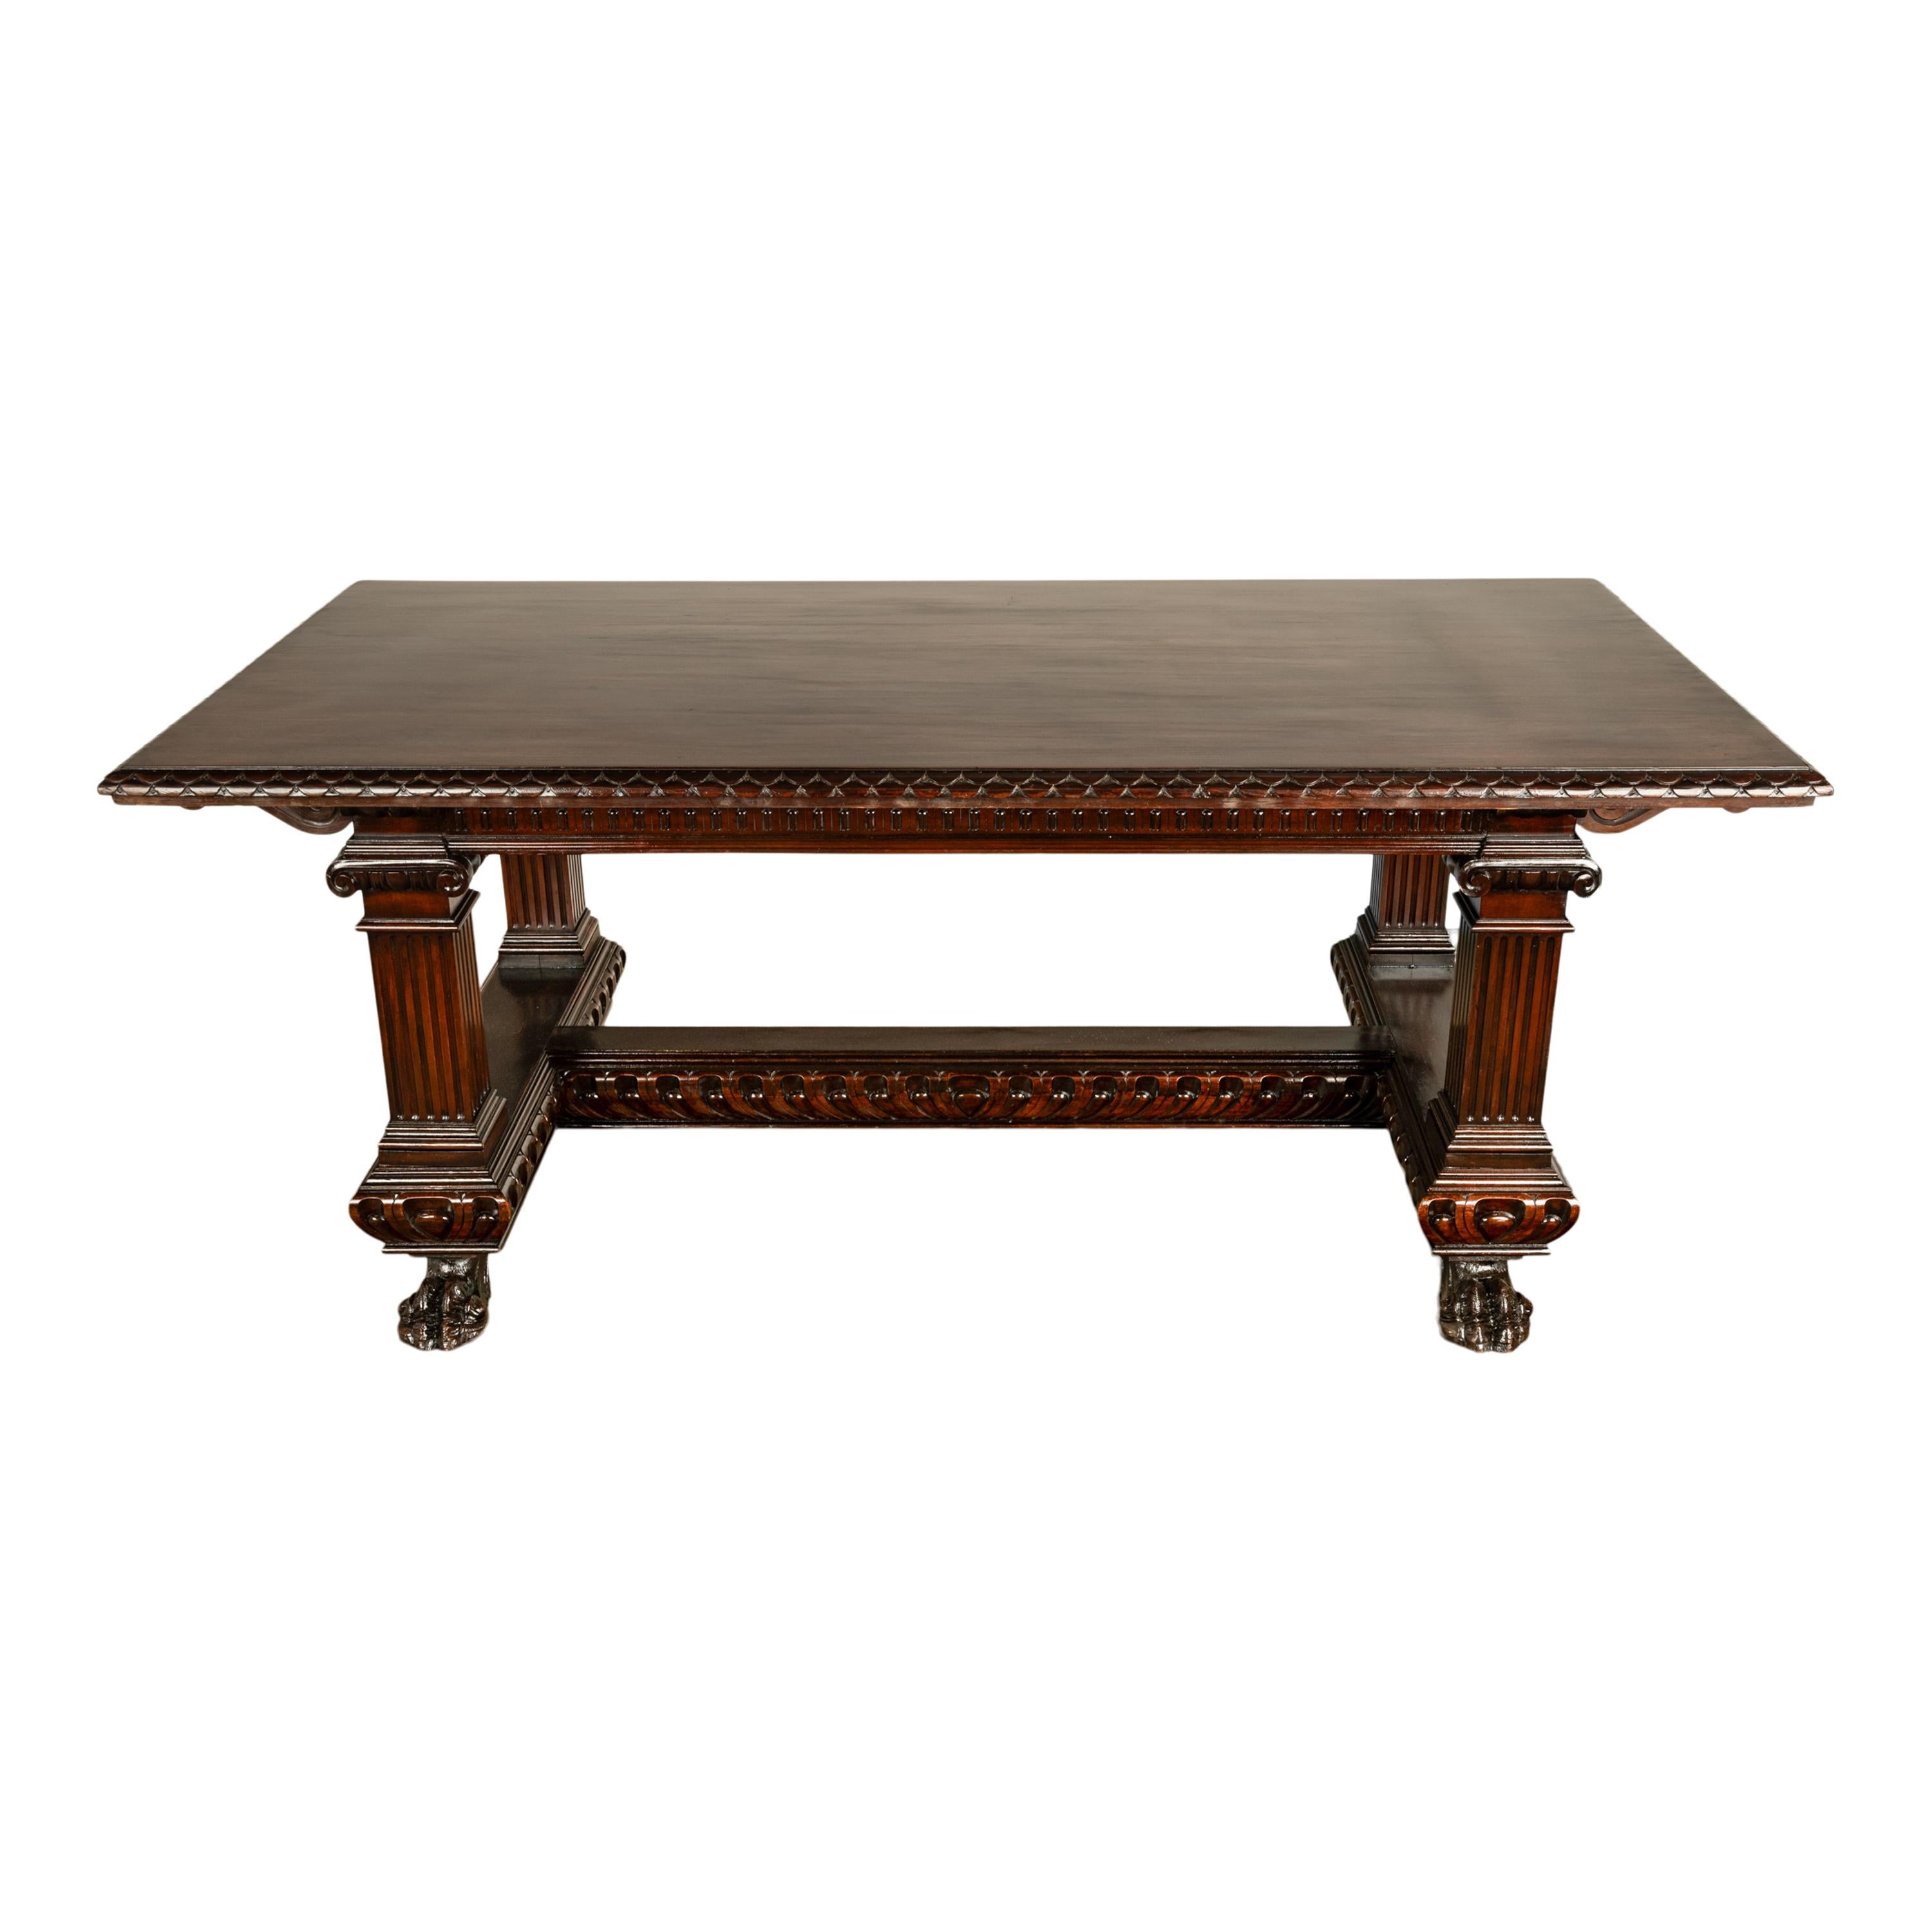 Late 19th Century Antique Italian Carved Renaissance Revival Walnut Library Dining Table 1880 For Sale